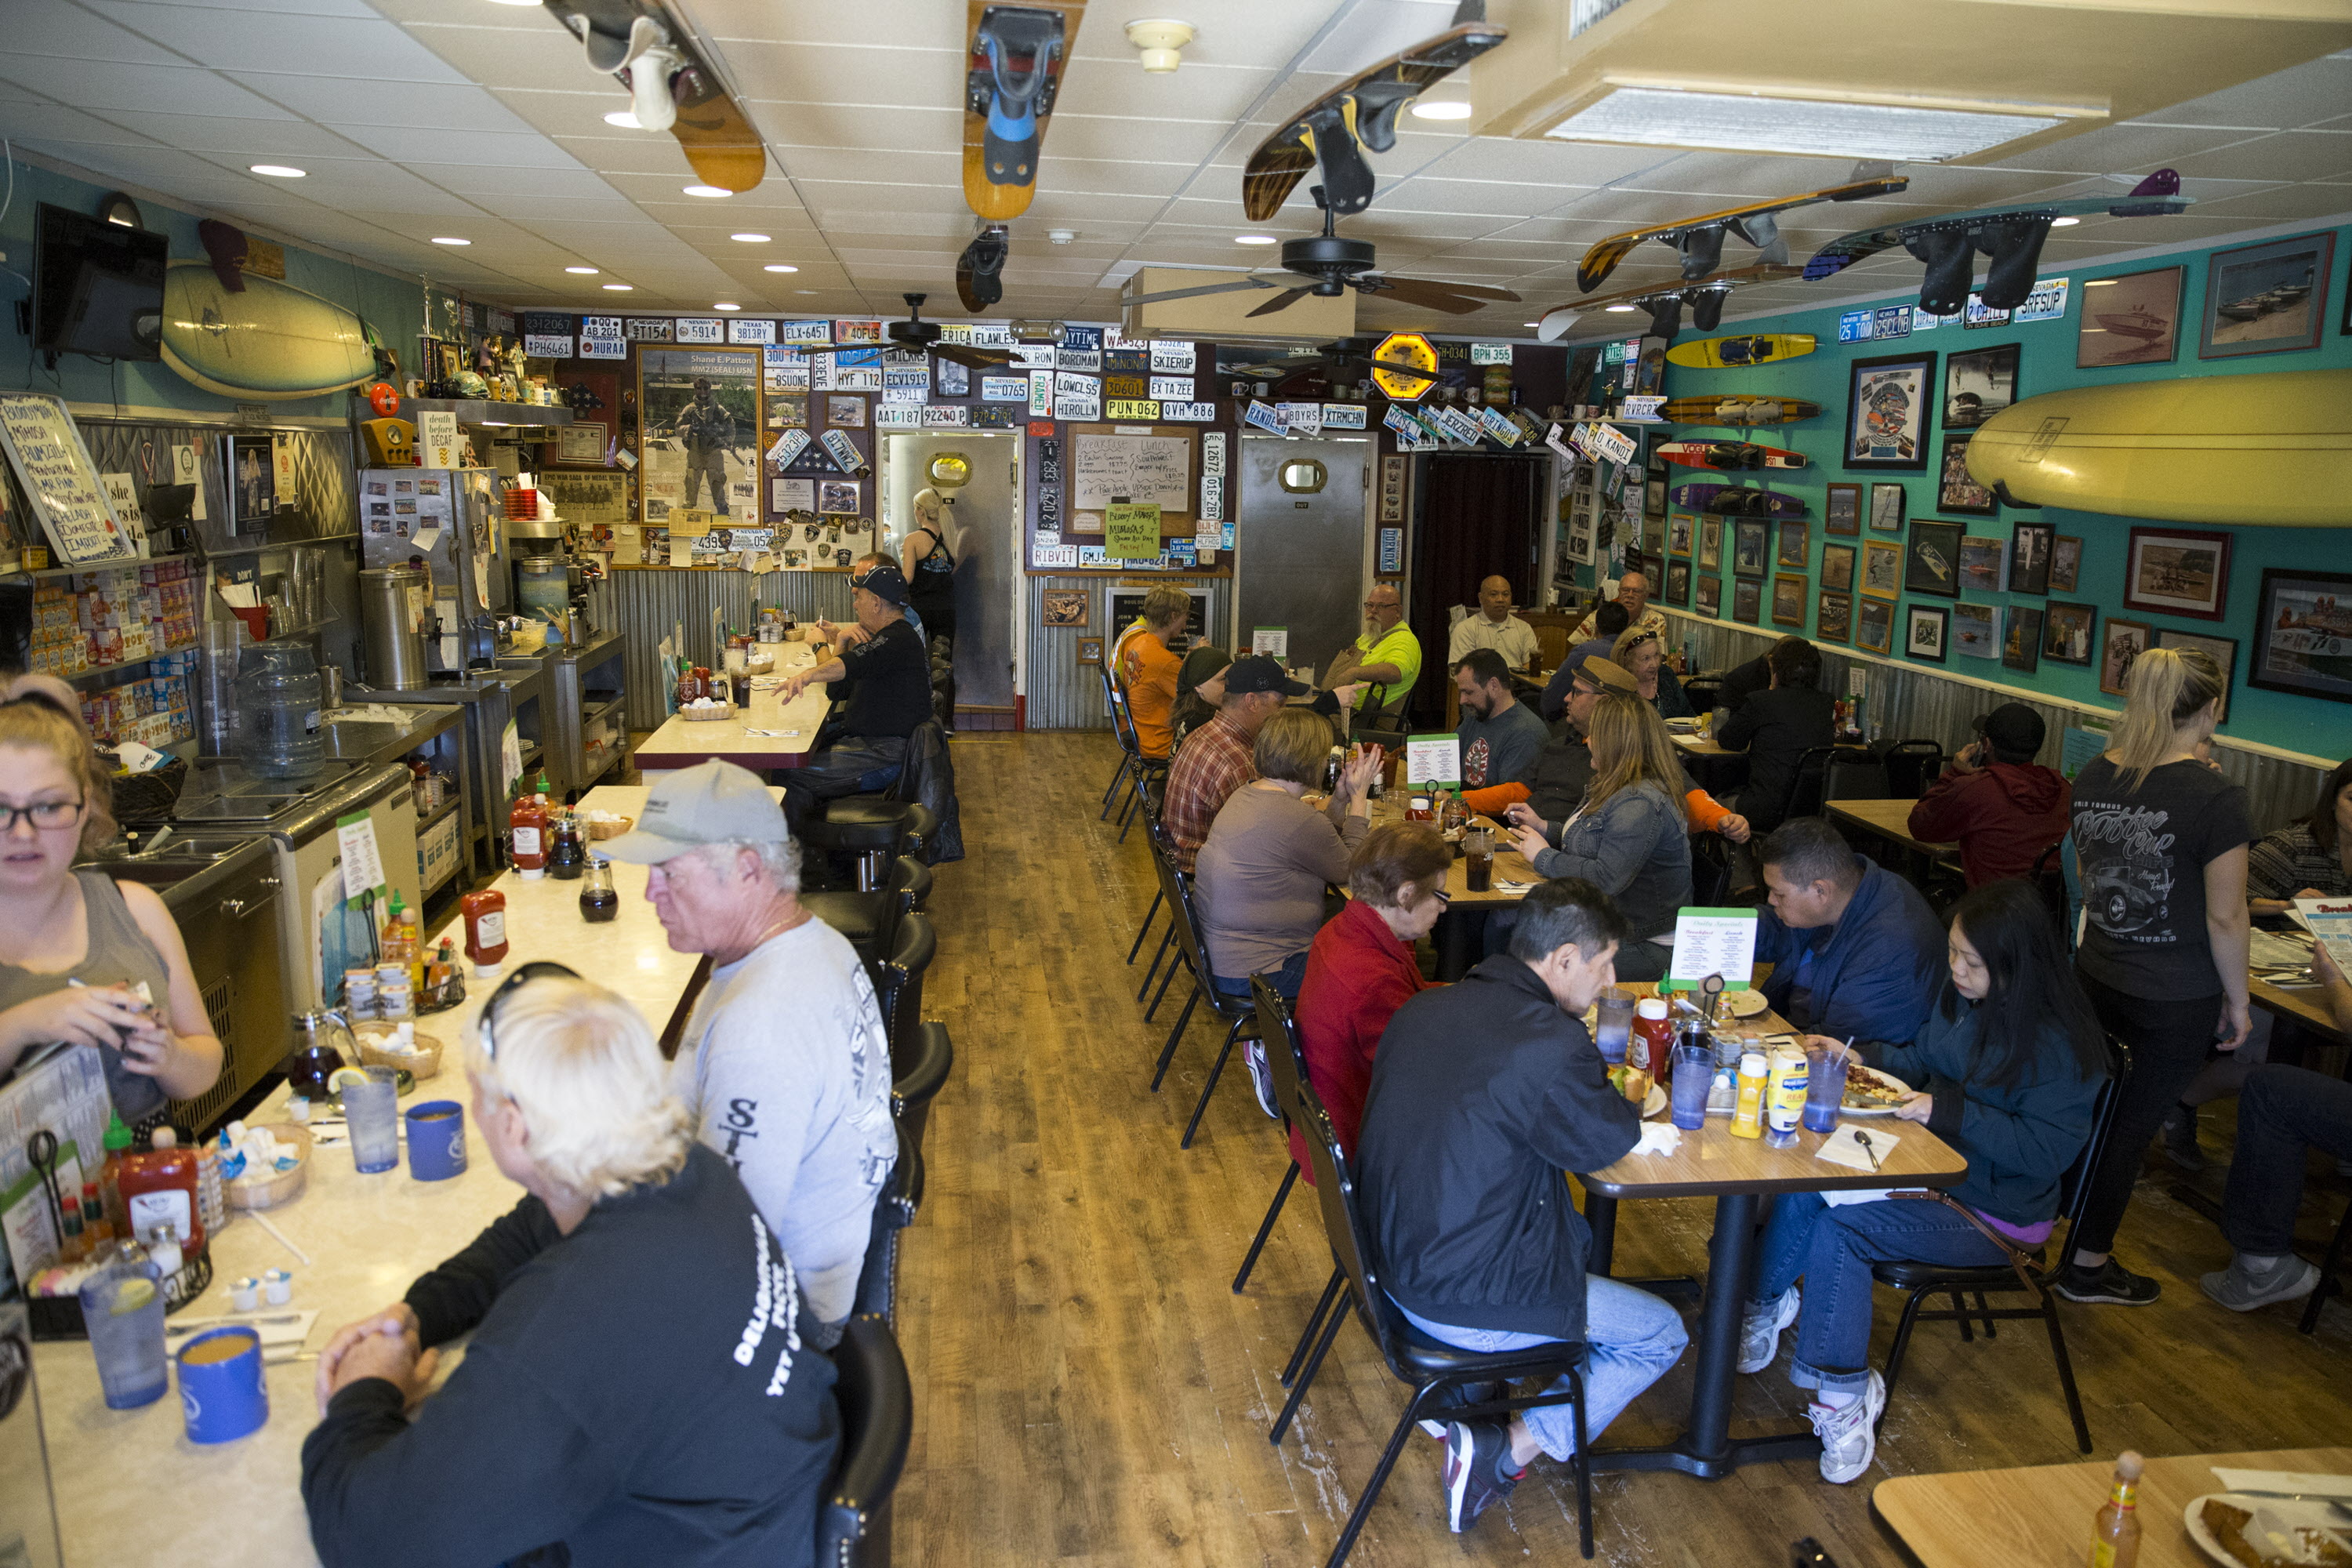 Boulder City's Coffee Cup earns place in hearts of diners | Las Vegas Review-Journal